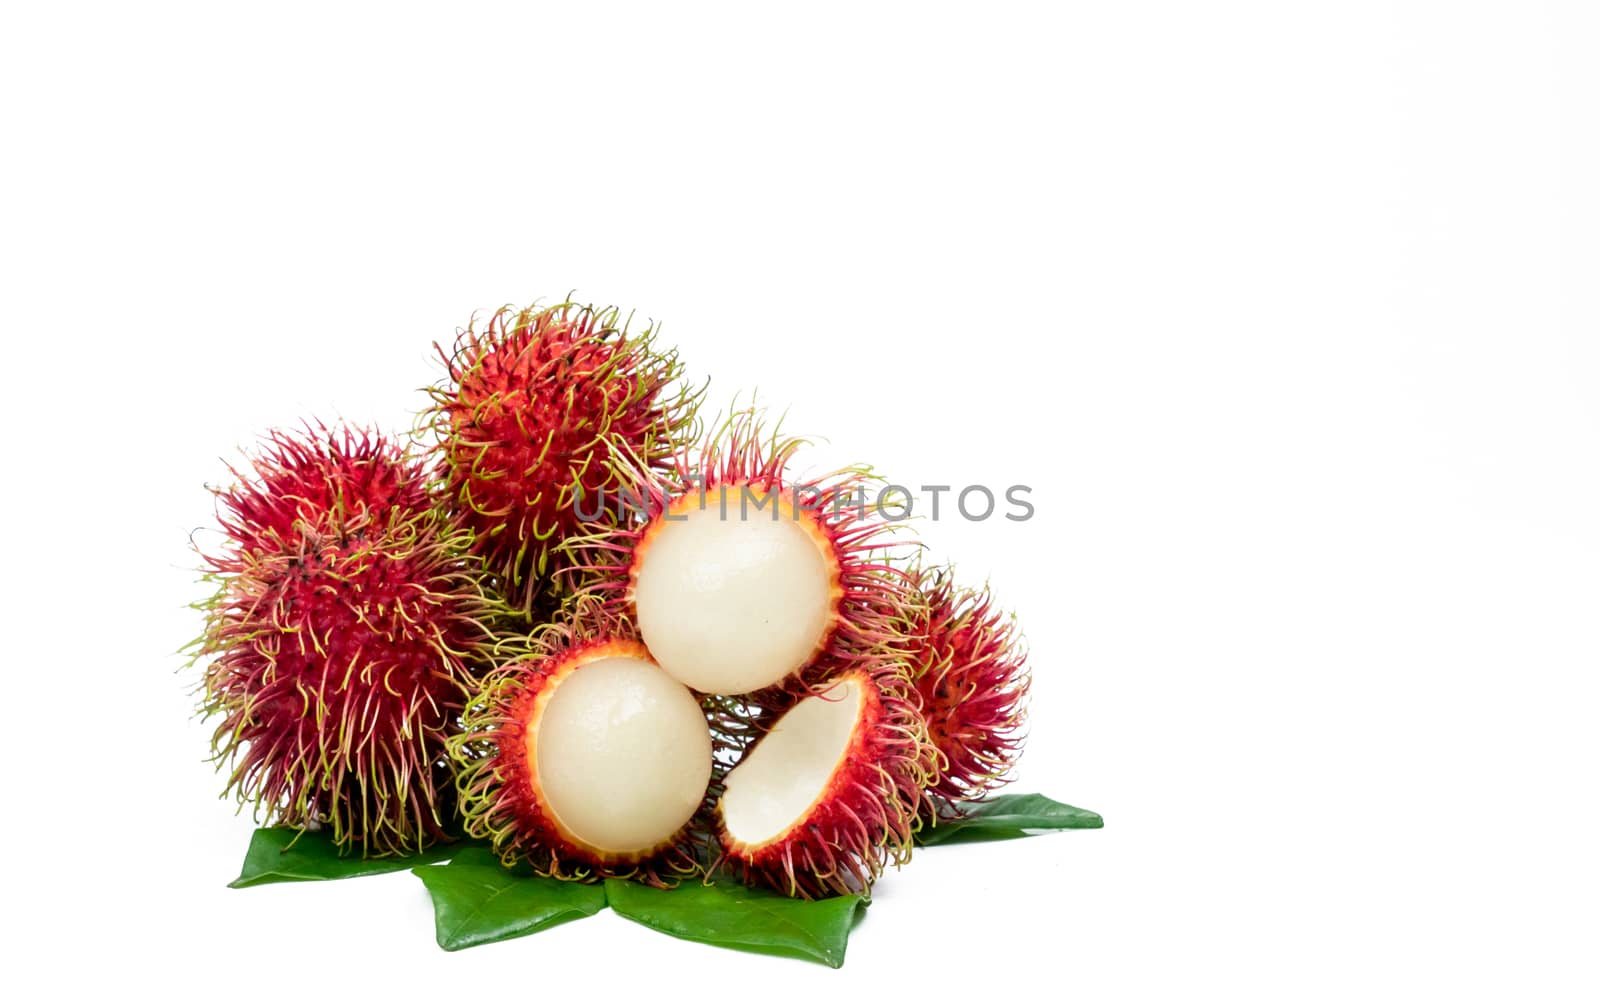 Closeup of fresh red ripe rambutan (Nephelium lappaceum) with leaves isolated on white background. Thai dessert sweet fruits. Tropical fruit.